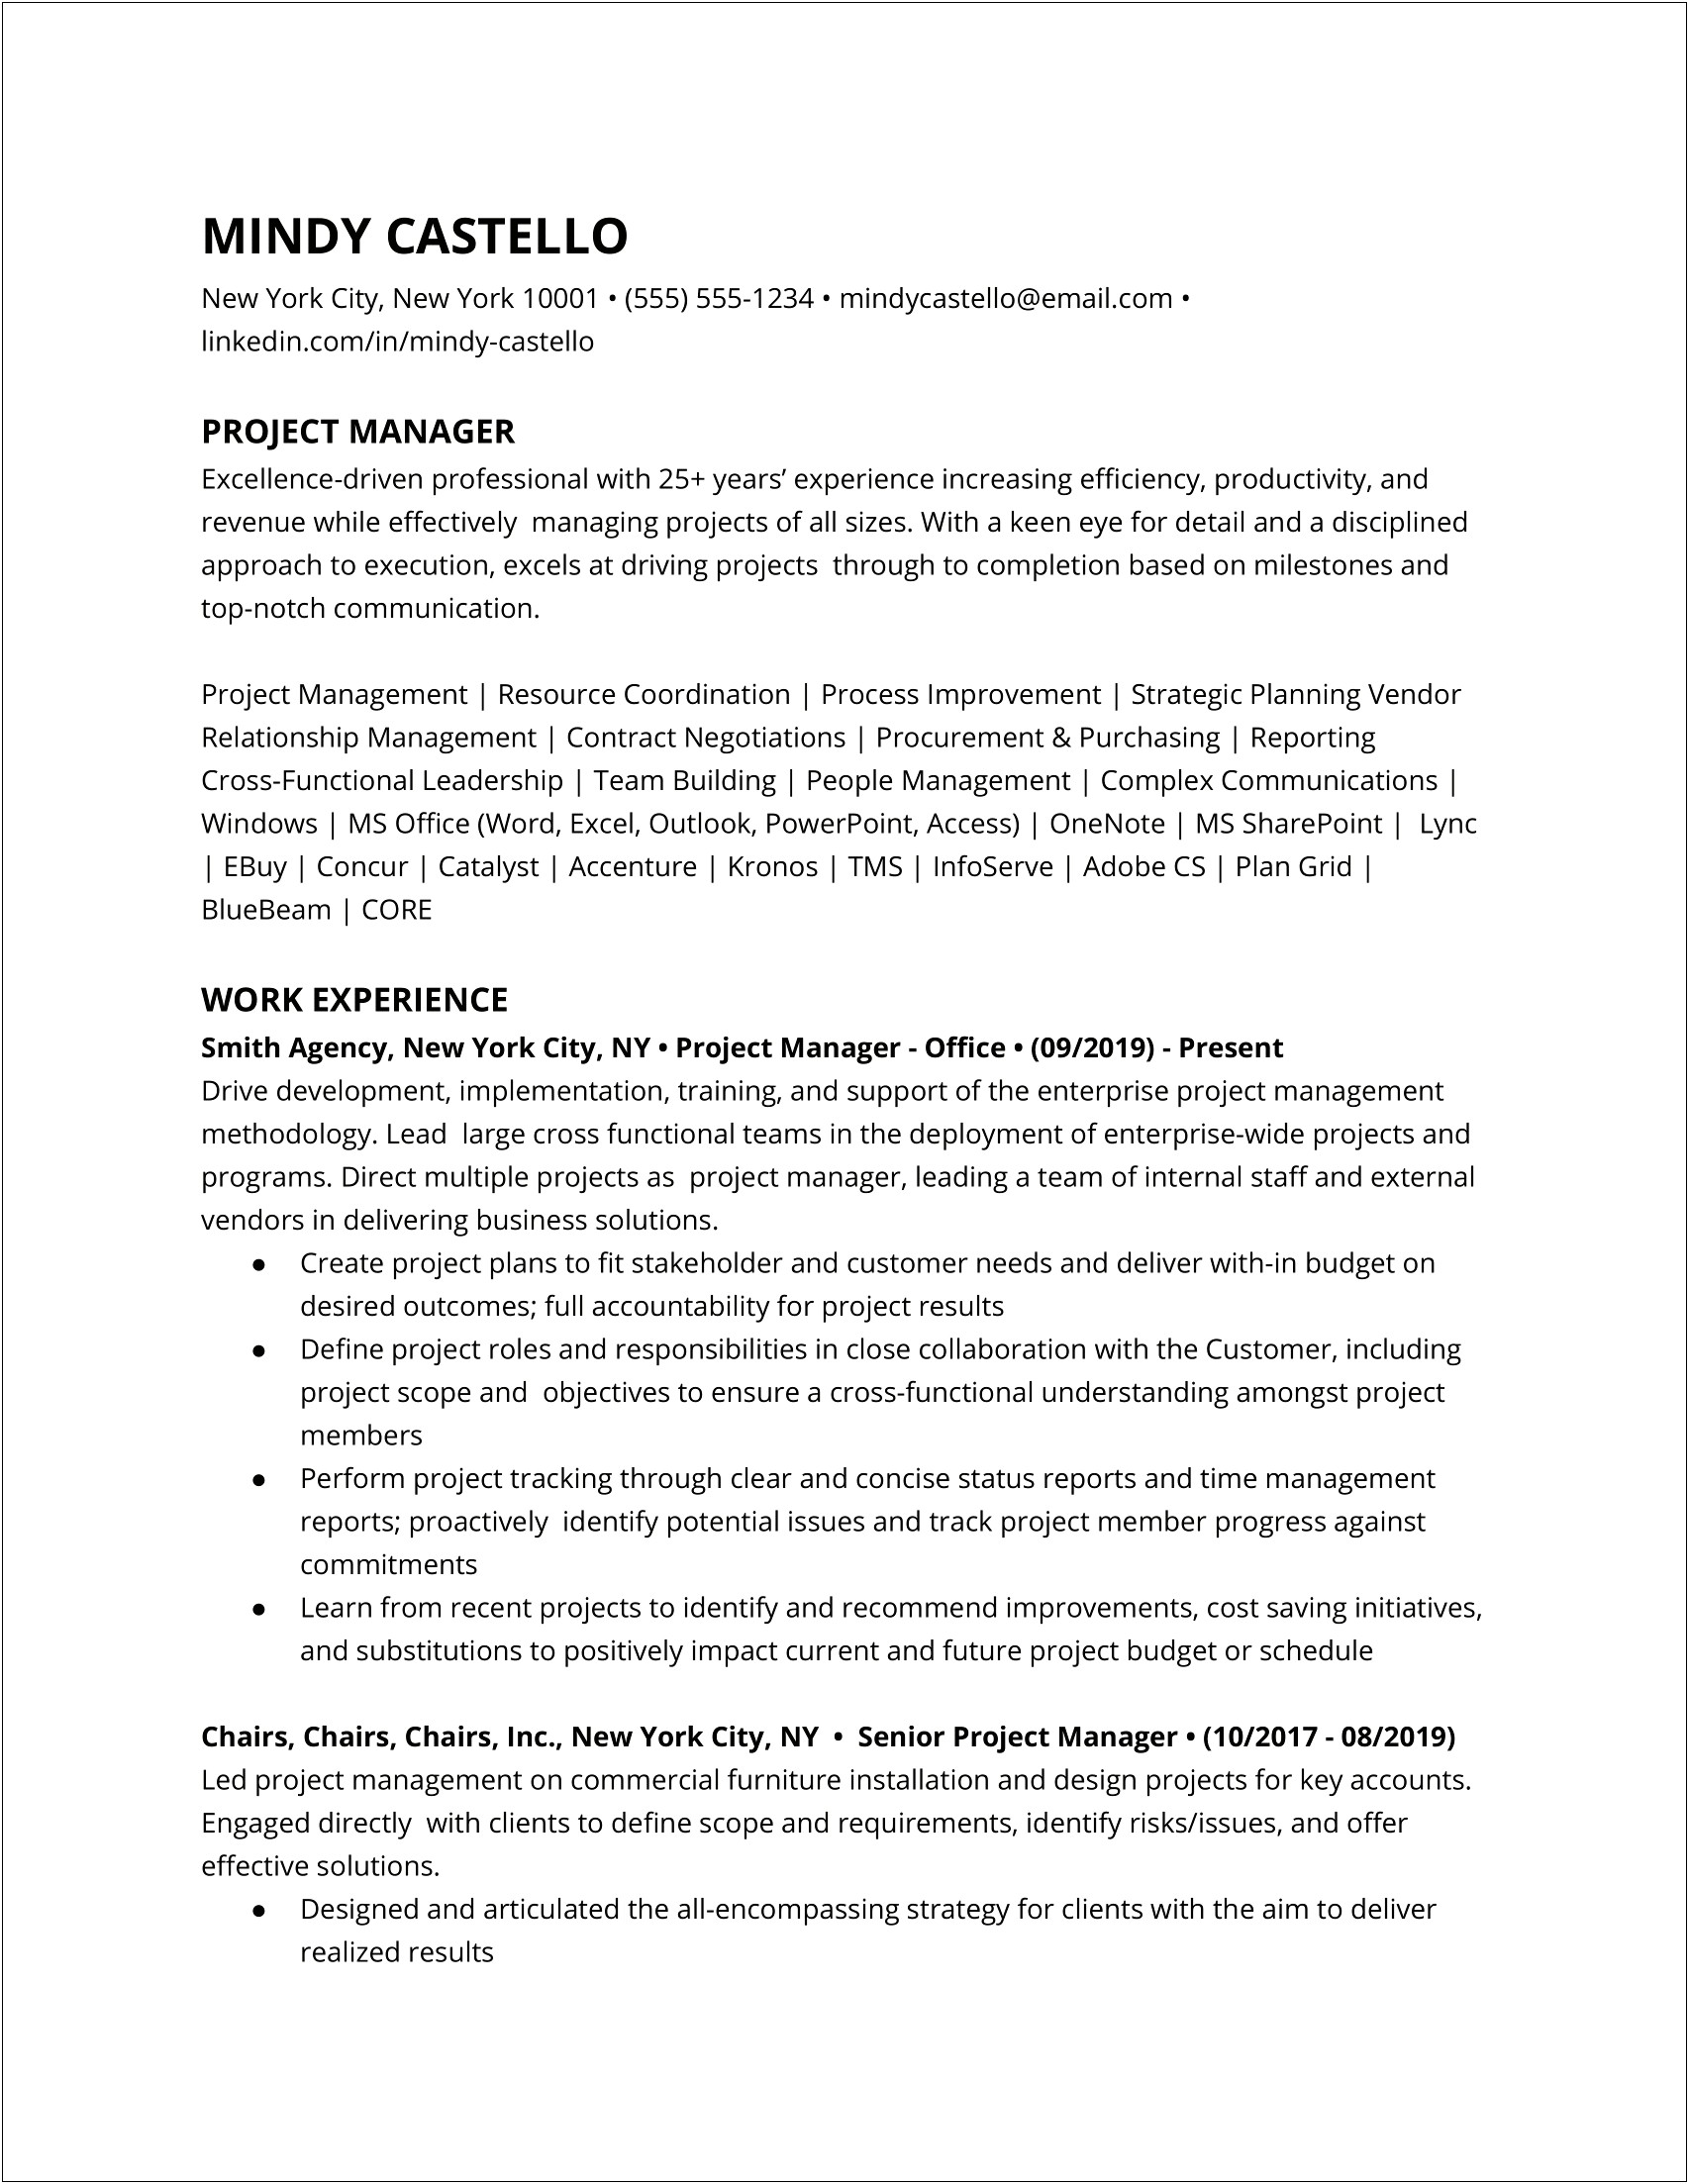 Construction Project Manager Resume Samples 2019